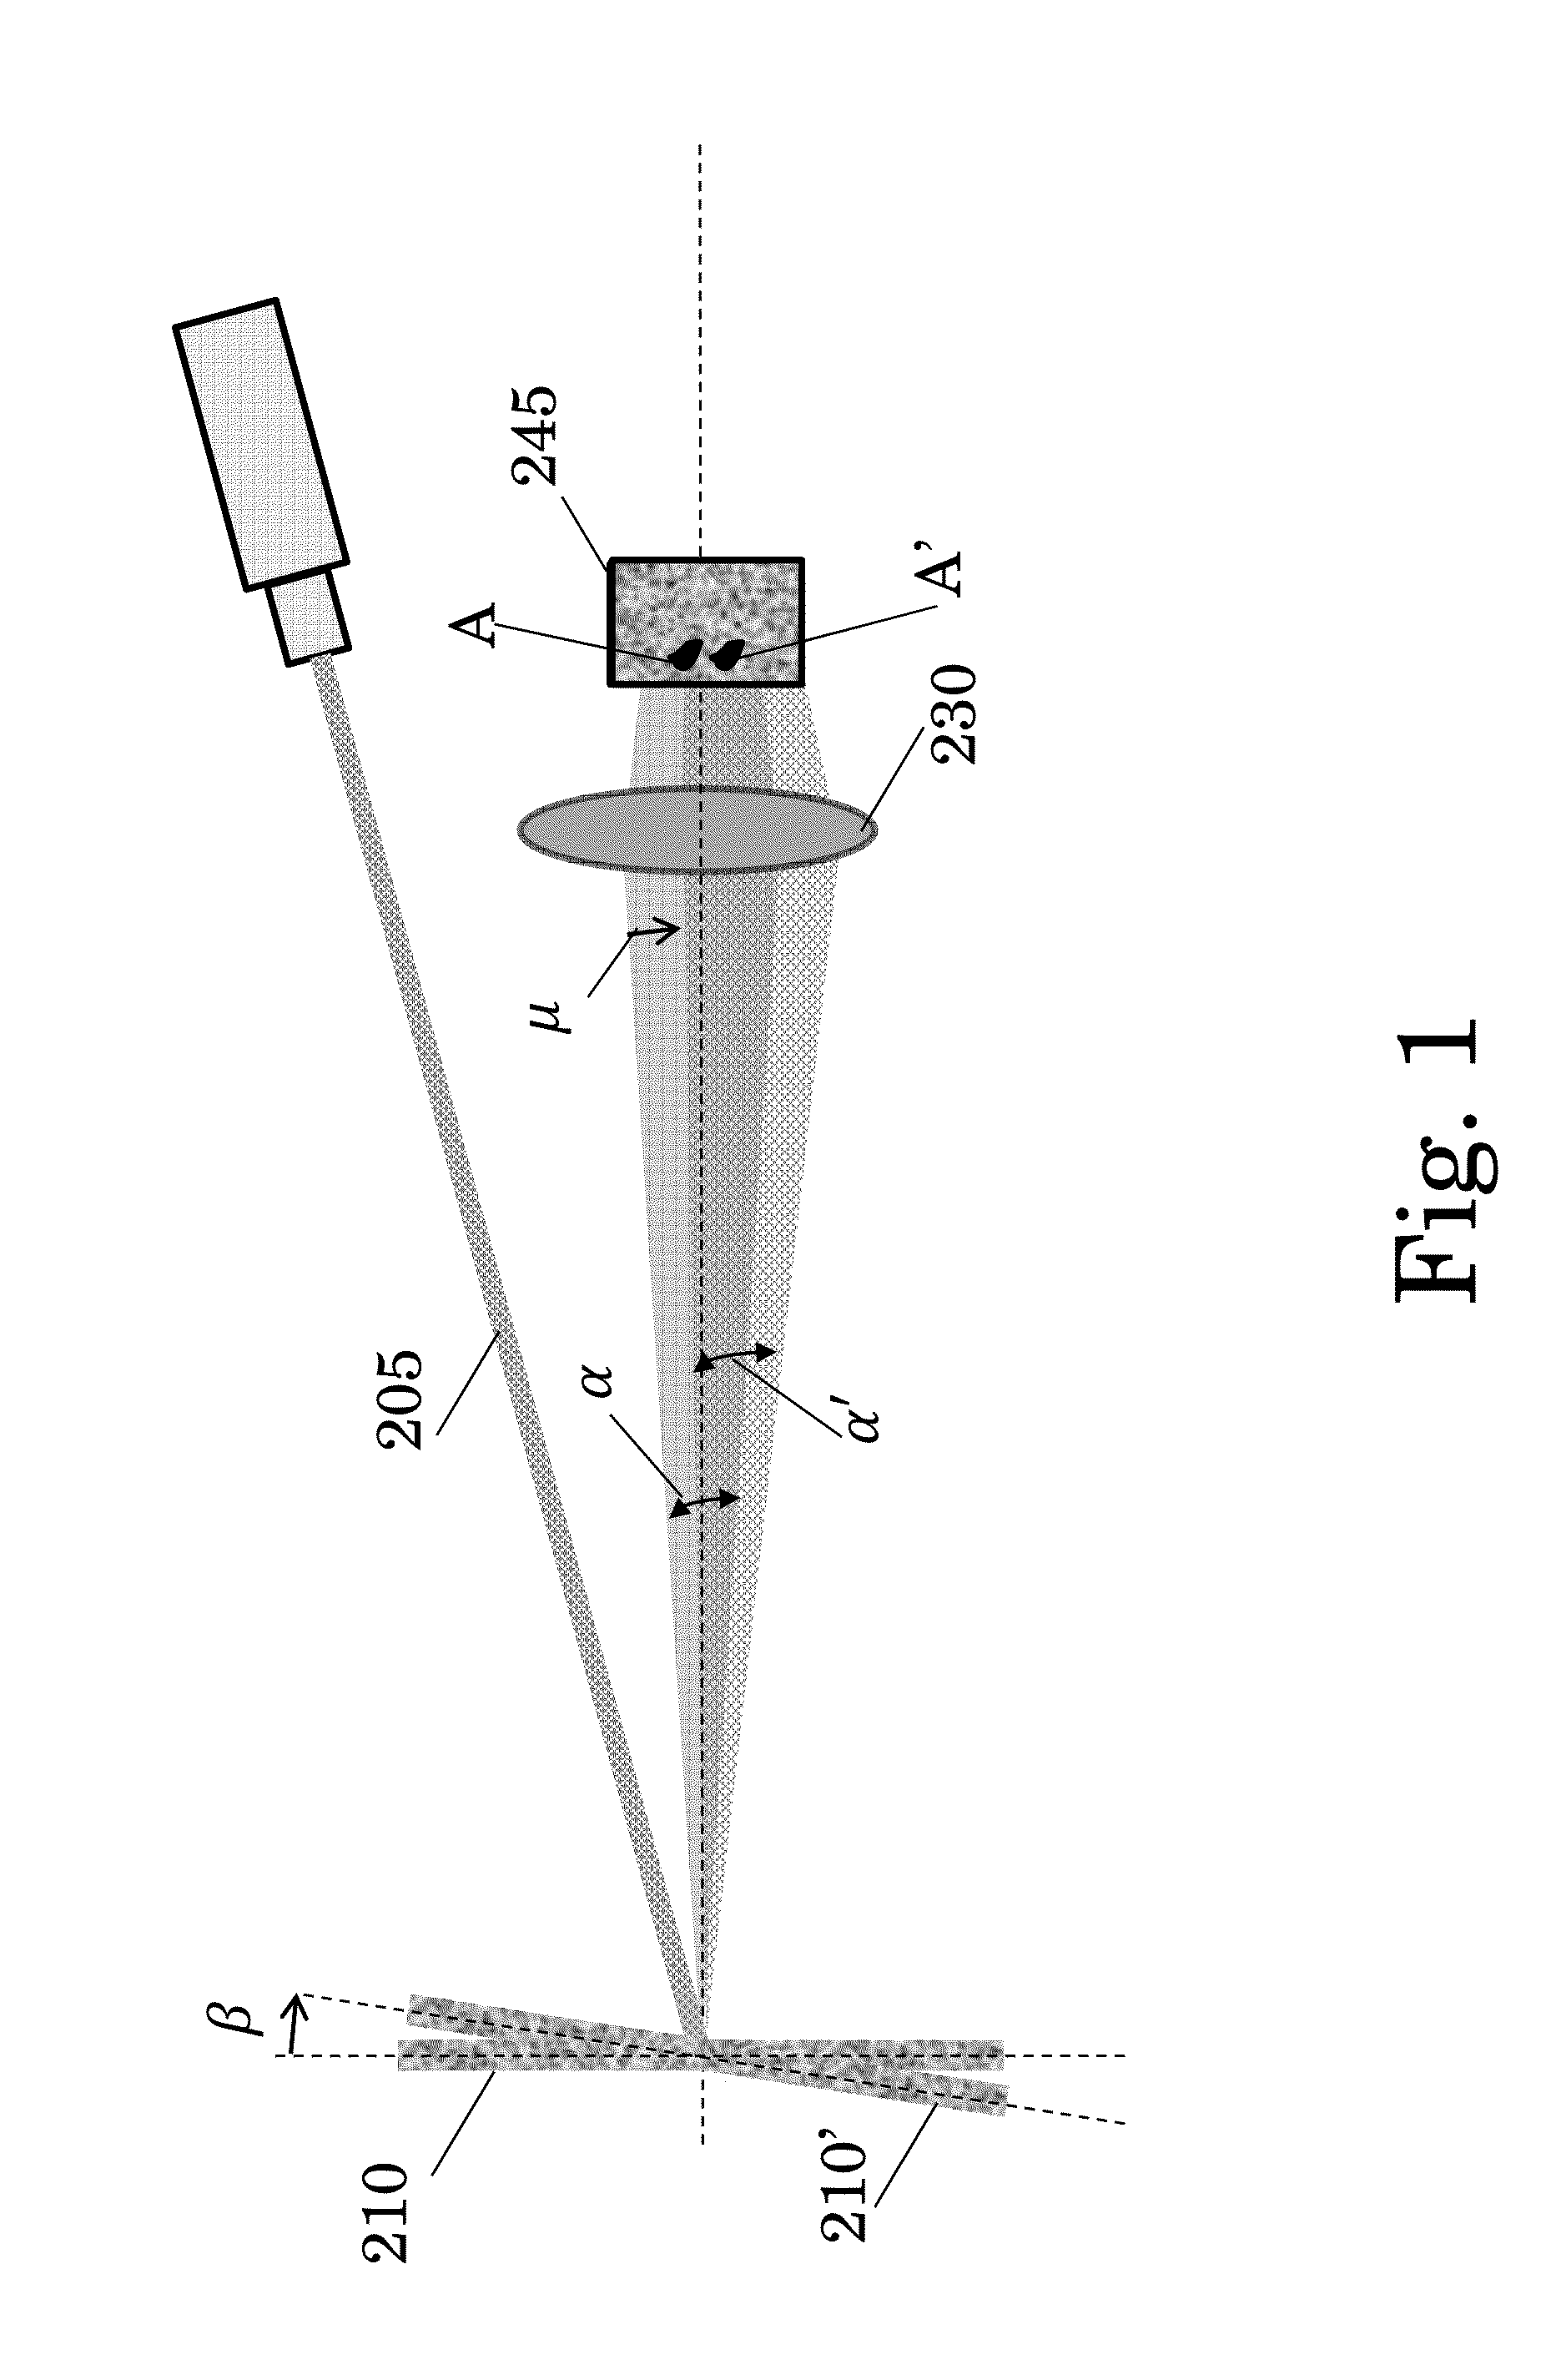 System and Method for Remotely Identifying and Characterizing Life Physiological Signs